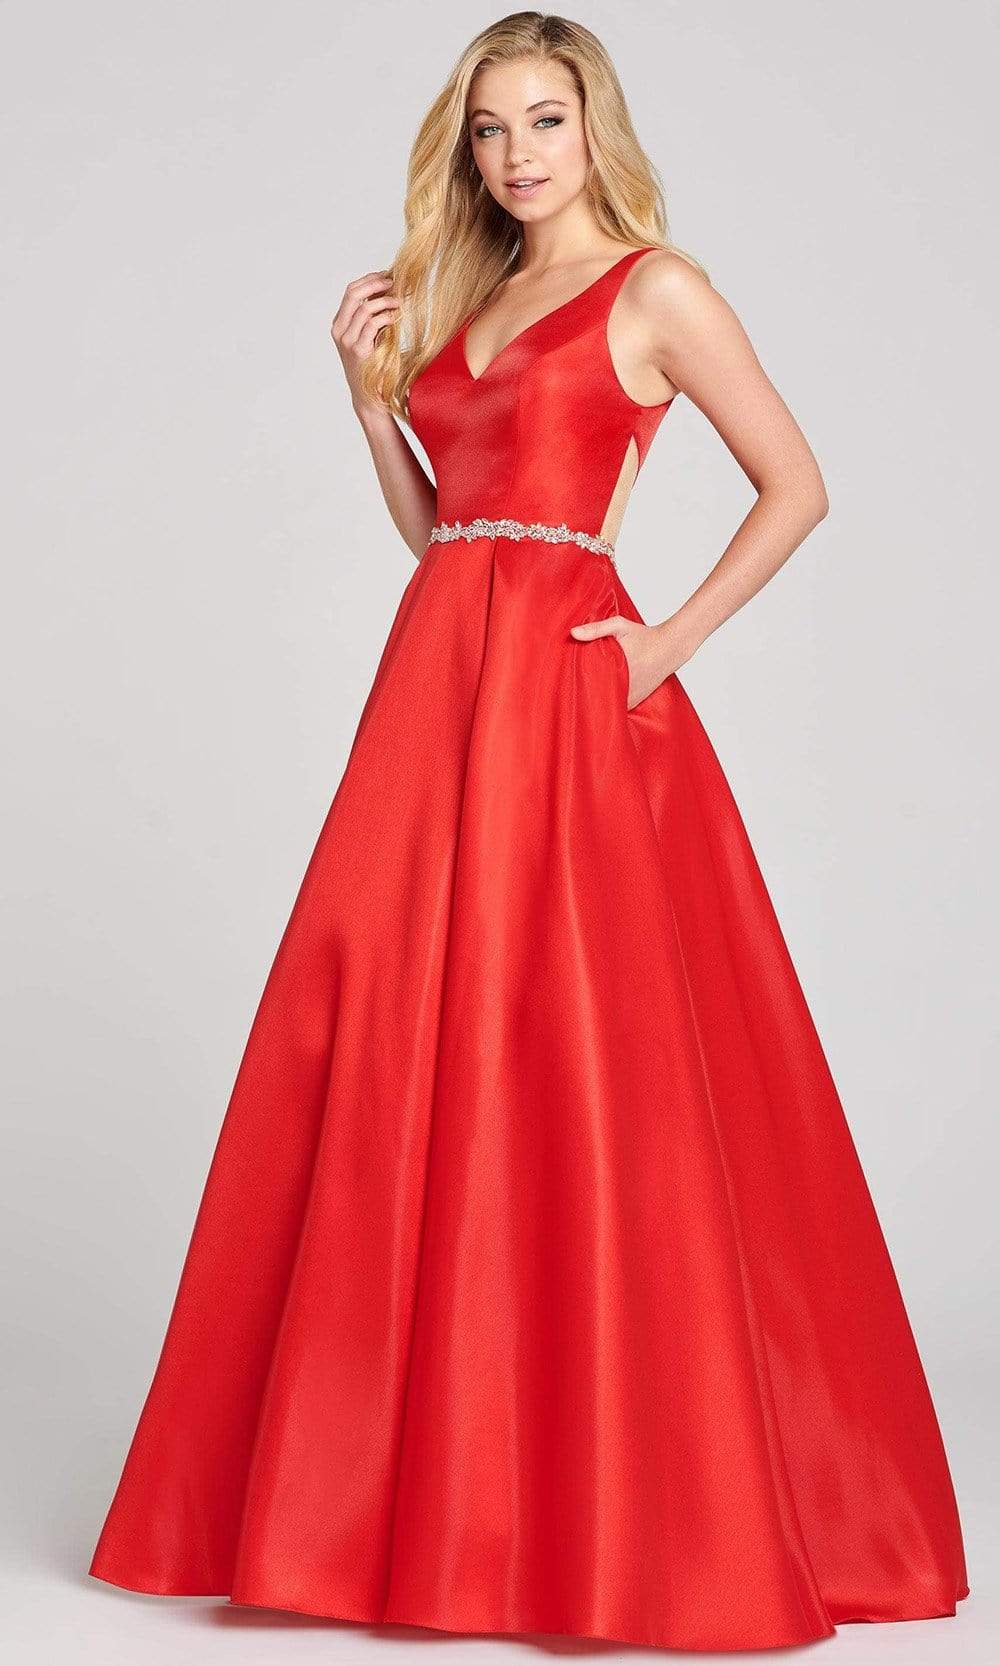 Colette for Mon Cheri - CL12131 Sleek Bejeweled Waist A-Line Gown Prom Dresses 00 / Candy Apple